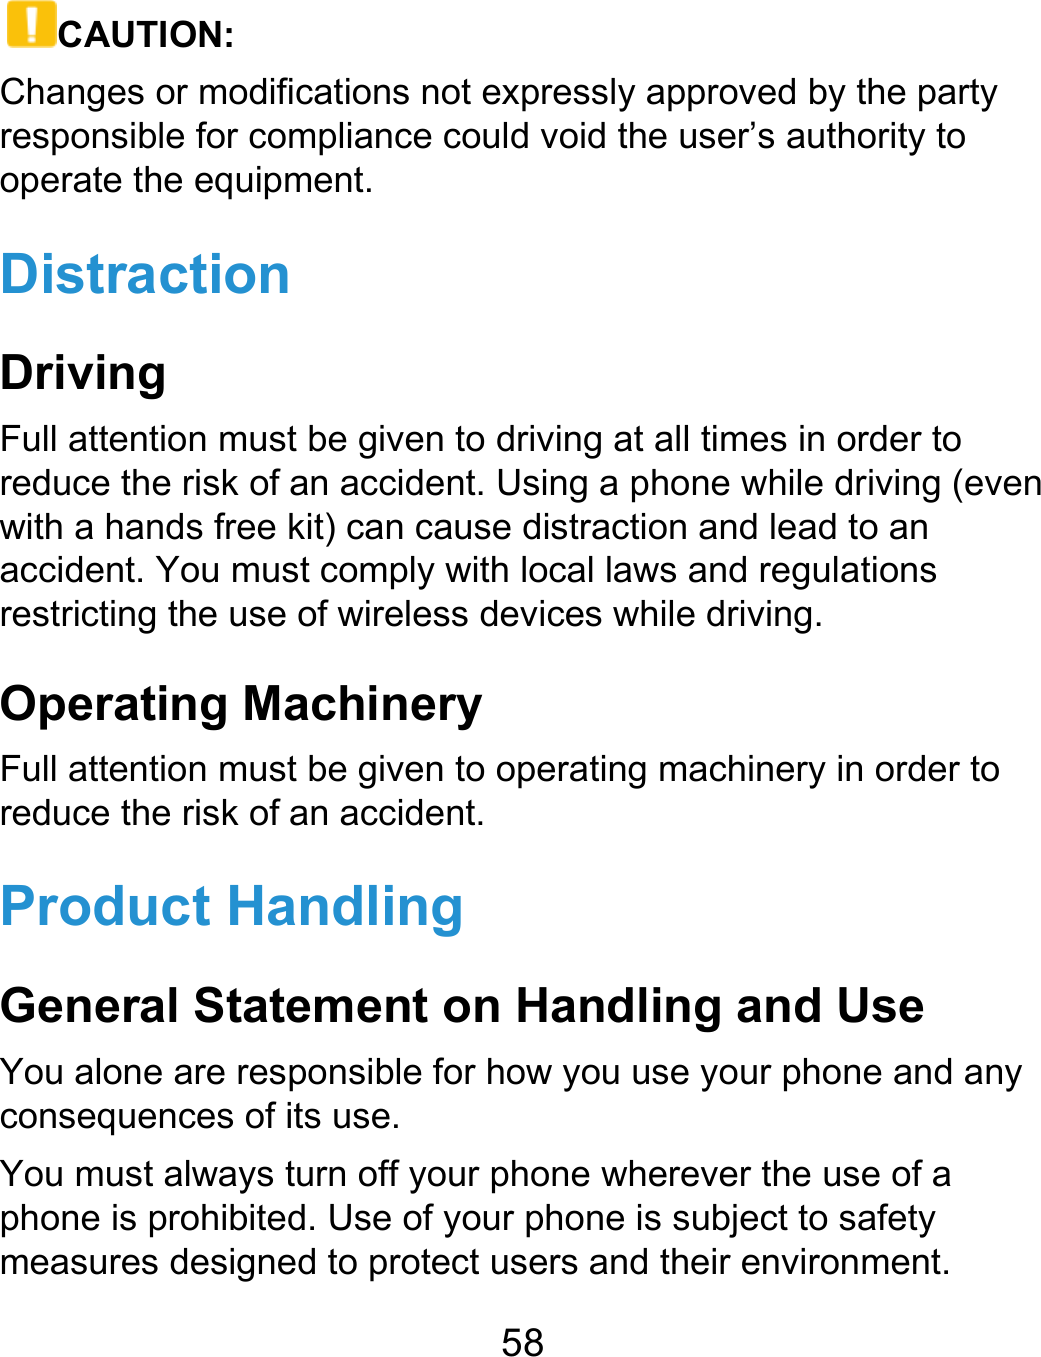  58 CAUTION: Changes or modifications not expressly approved by the party responsible for compliance could void the user’s authority to operate the equipment. Distraction Driving Full attention must be given to driving at all times in order to reduce the risk of an accident. Using a phone while driving (even with a hands free kit) can cause distraction and lead to an accident. You must comply with local laws and regulations restricting the use of wireless devices while driving. Operating Machinery Full attention must be given to operating machinery in order to reduce the risk of an accident. Product Handling General Statement on Handling and Use You alone are responsible for how you use your phone and any consequences of its use. You must always turn off your phone wherever the use of a phone is prohibited. Use of your phone is subject to safety measures designed to protect users and their environment. 